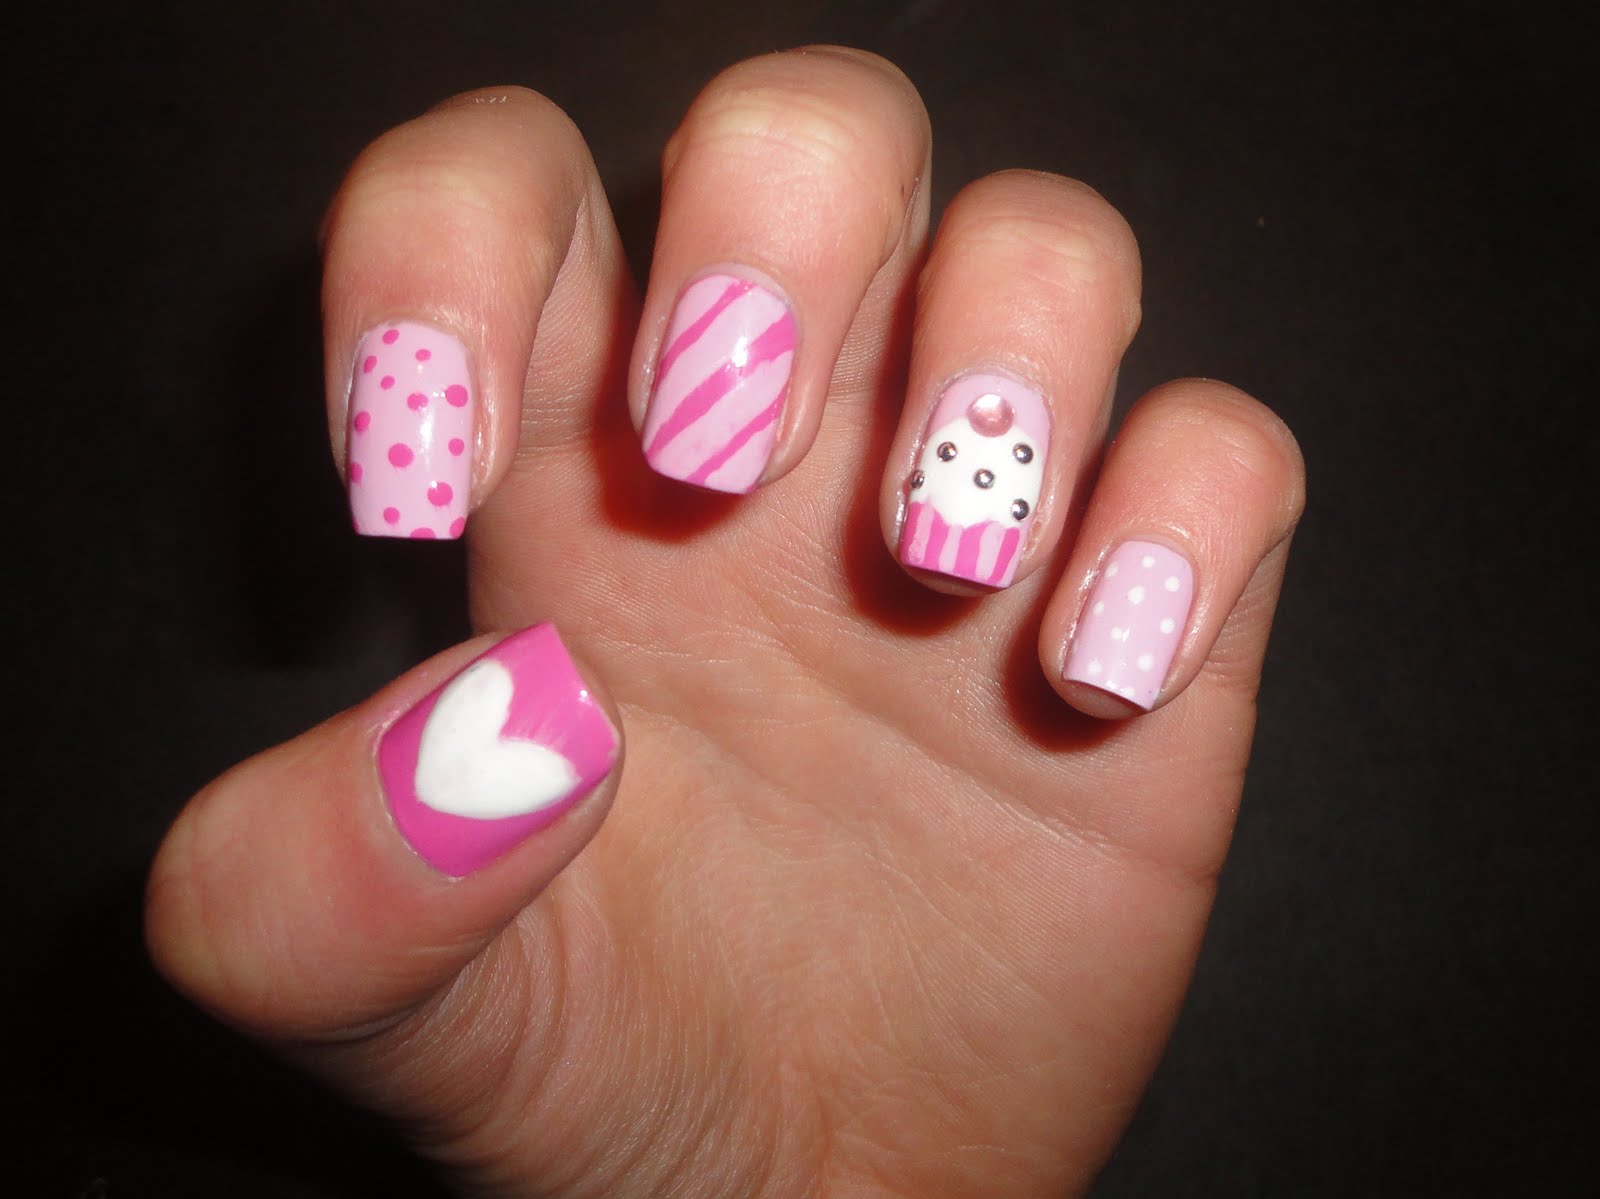 2. Cute and Easy Nail Art Ideas - wide 2